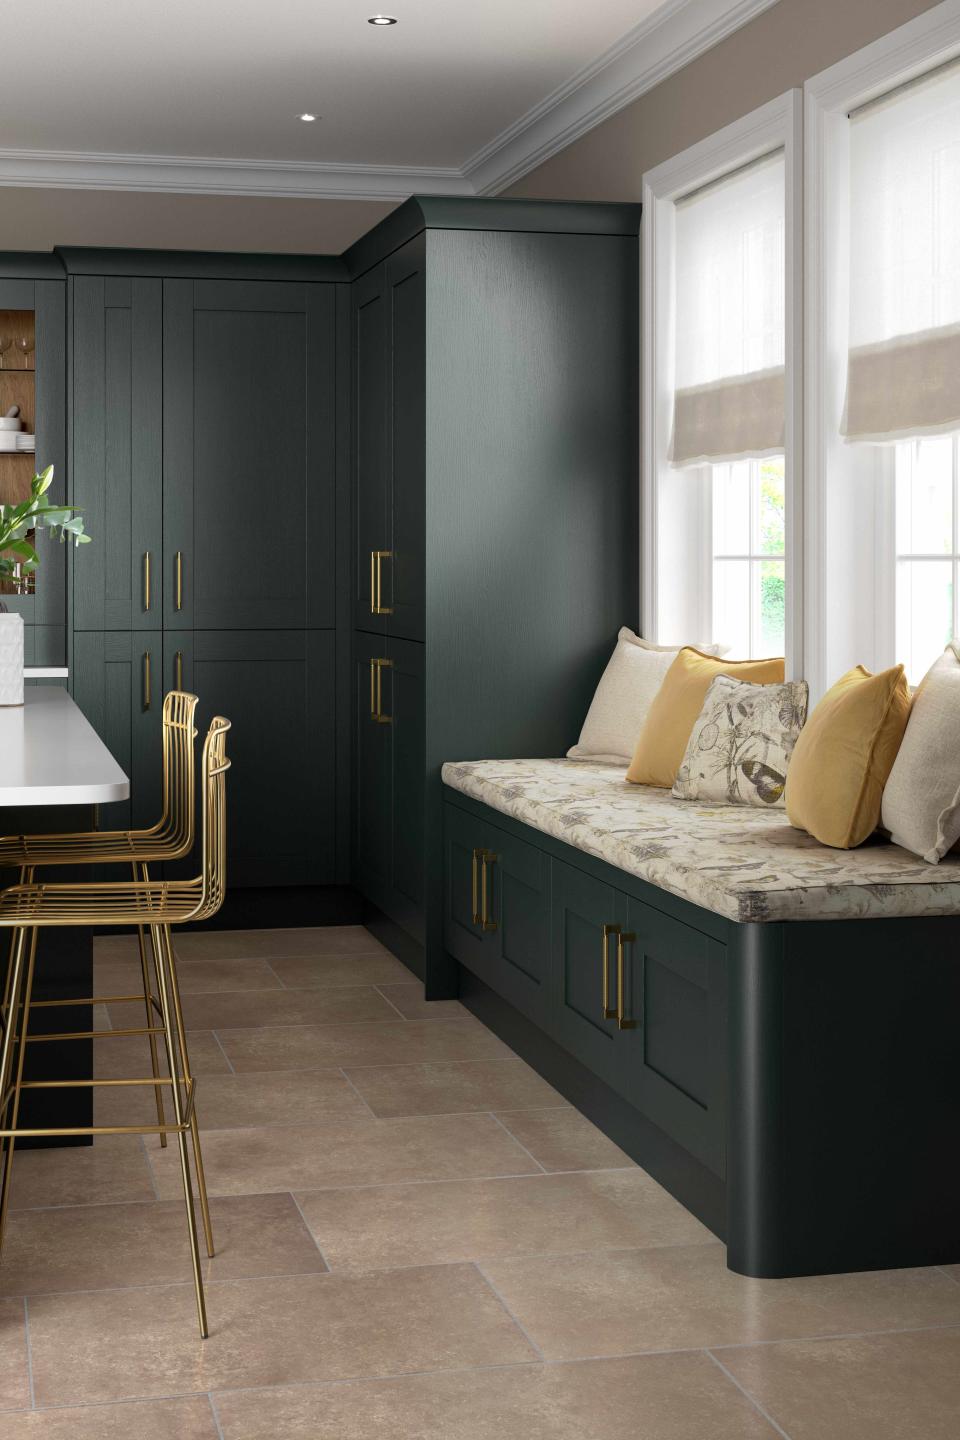 GLAM UP A GREEN KITCHEN WITH GOLD FITTINGS